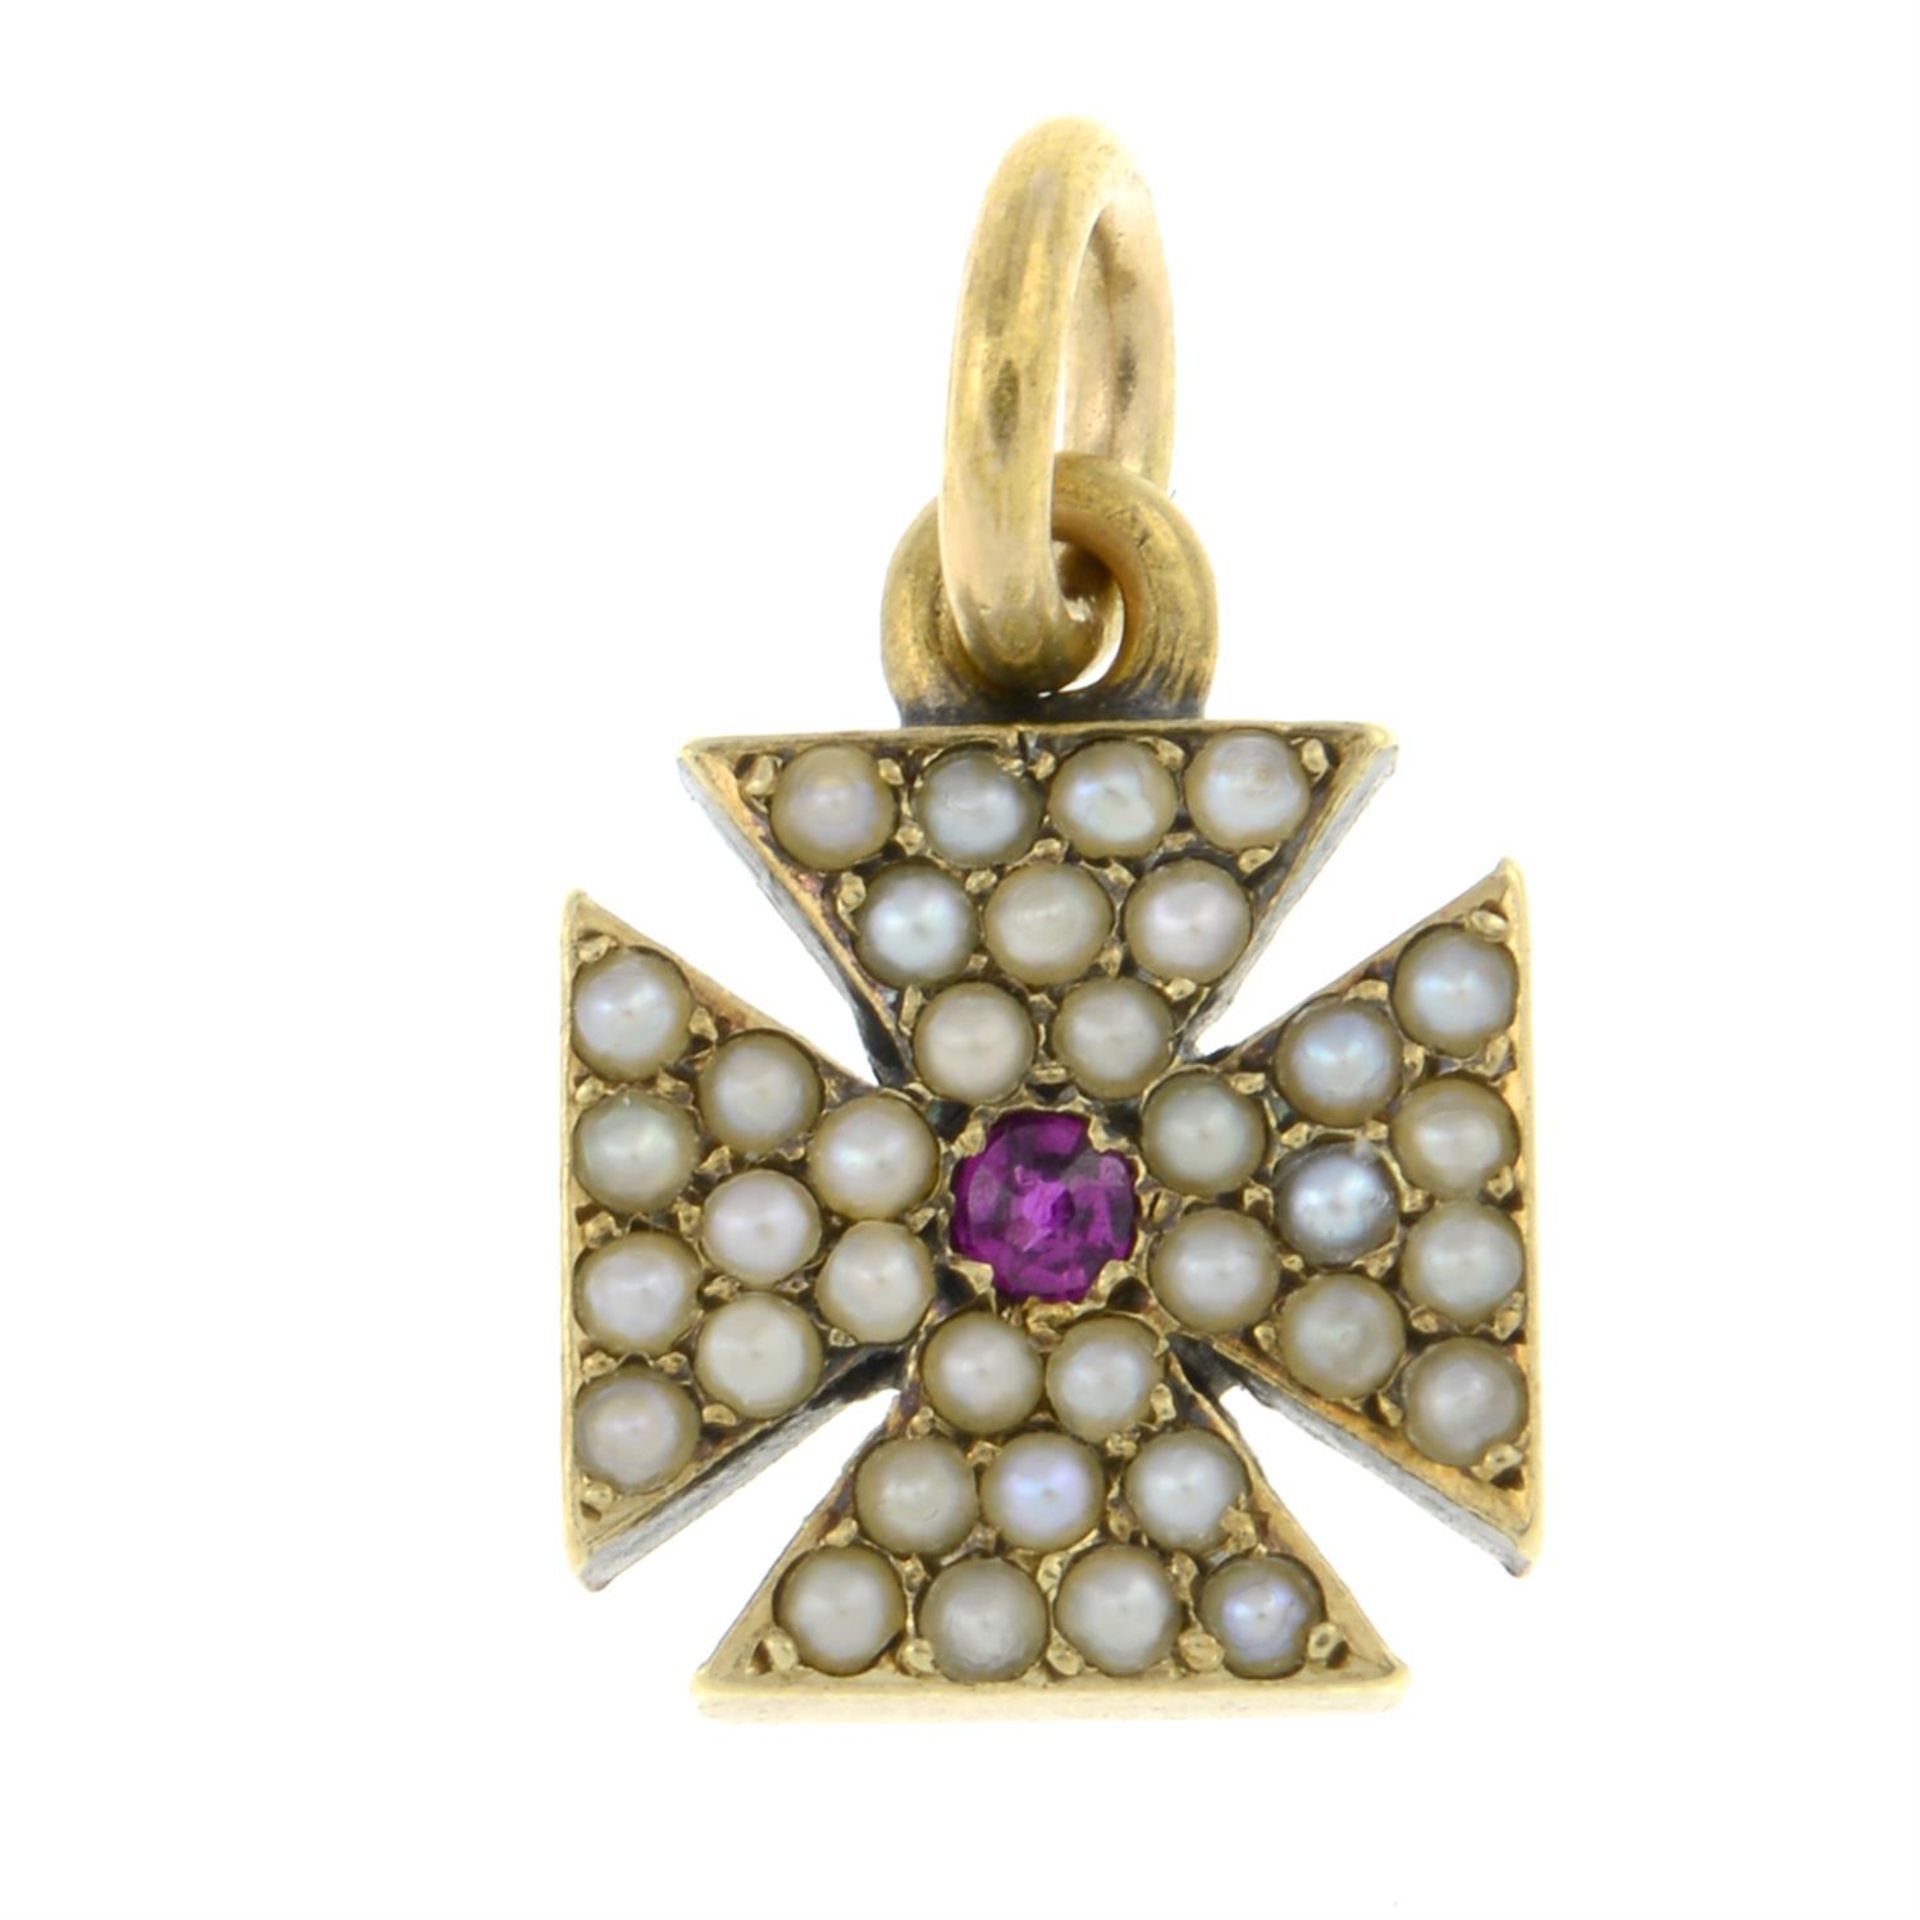 A late 19th century gold split pearl and ruby Maltese cross pendant/ charm.